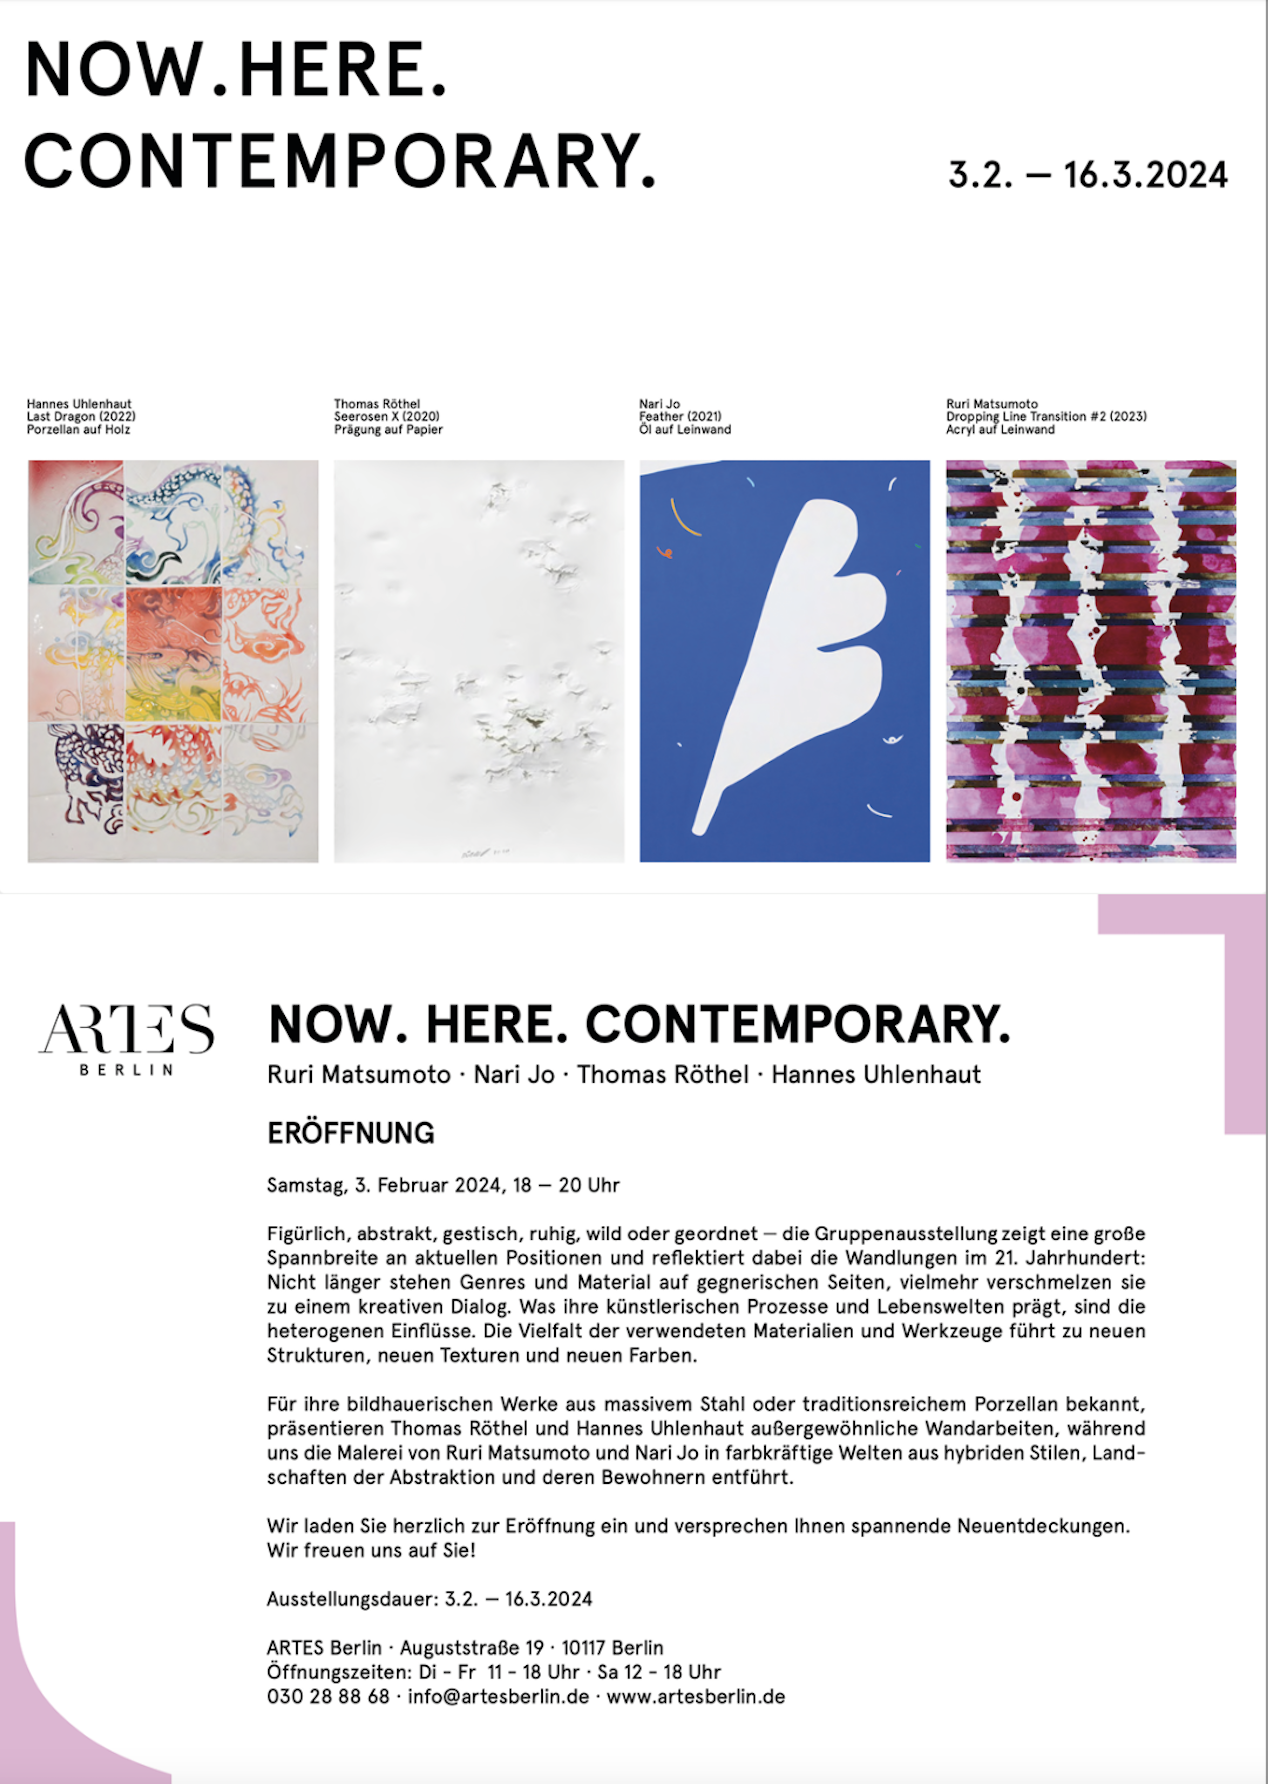 NOW. HERE. CONTEMPORARY.